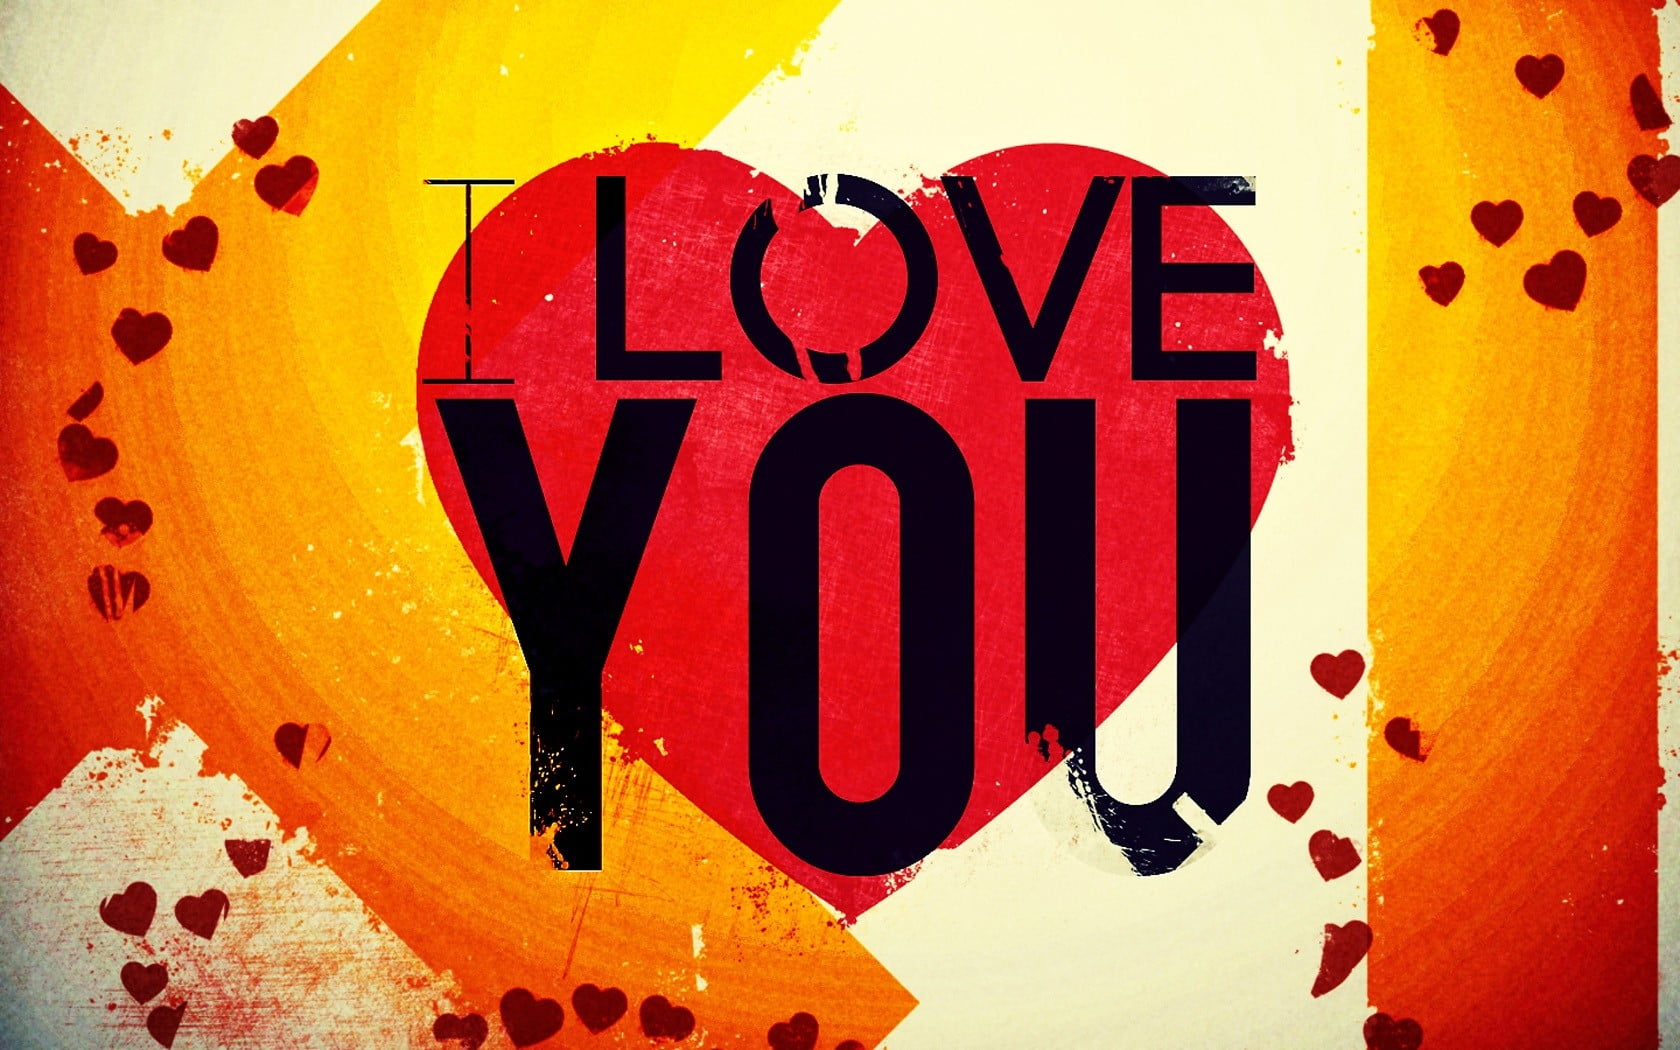 I Love You text with red heart background digital wallpaper